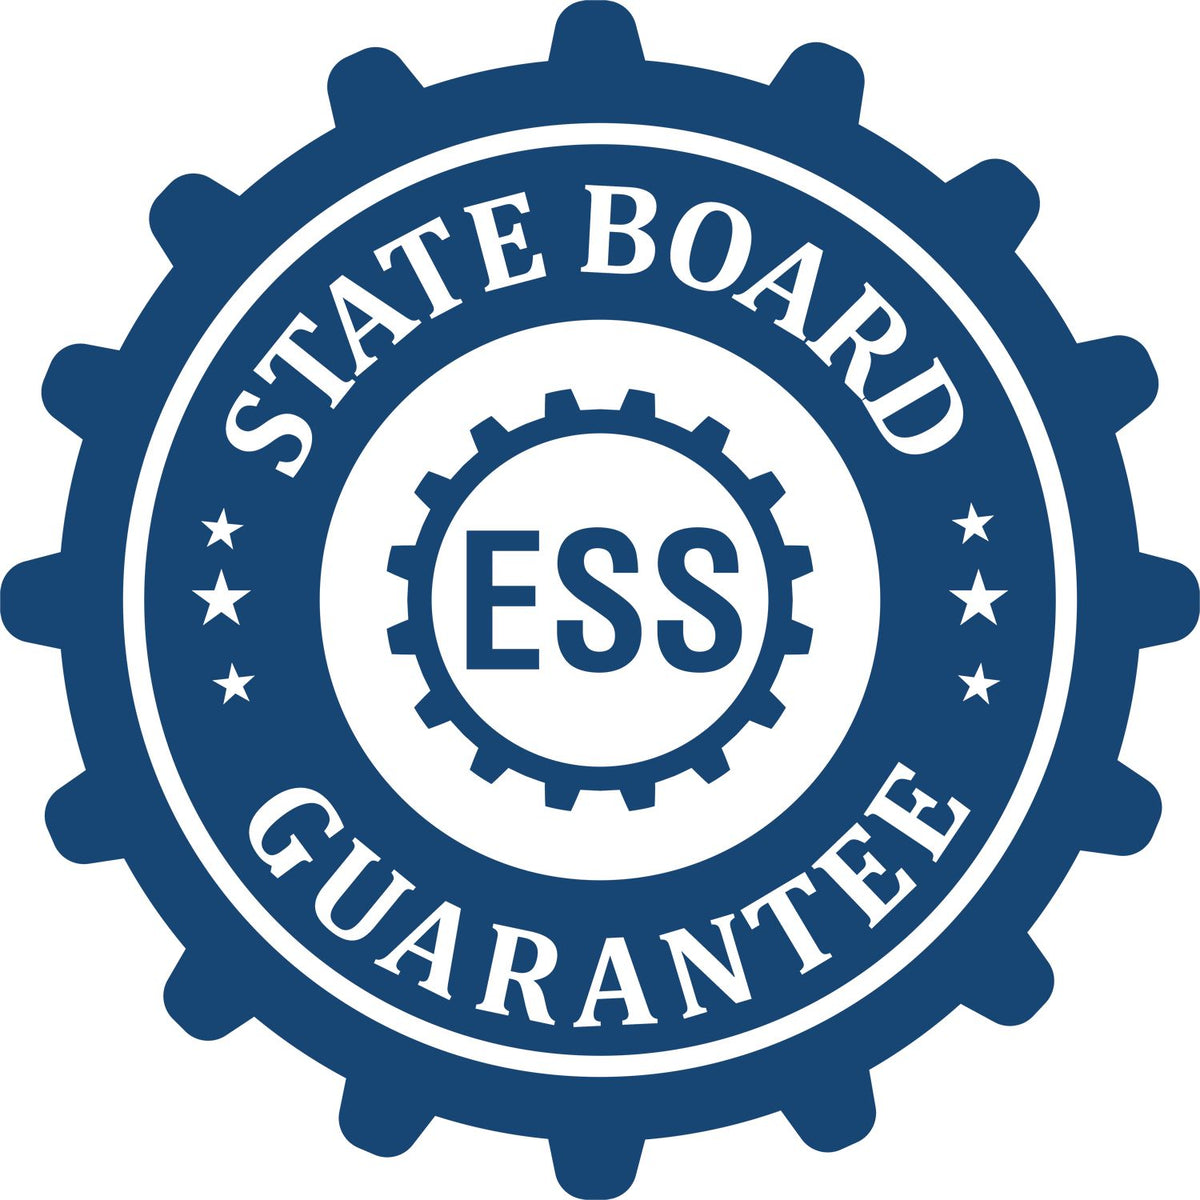 An emblem in a gear shape illustrating a state board guarantee for the State of Kentucky Extended Long Reach Geologist Seal